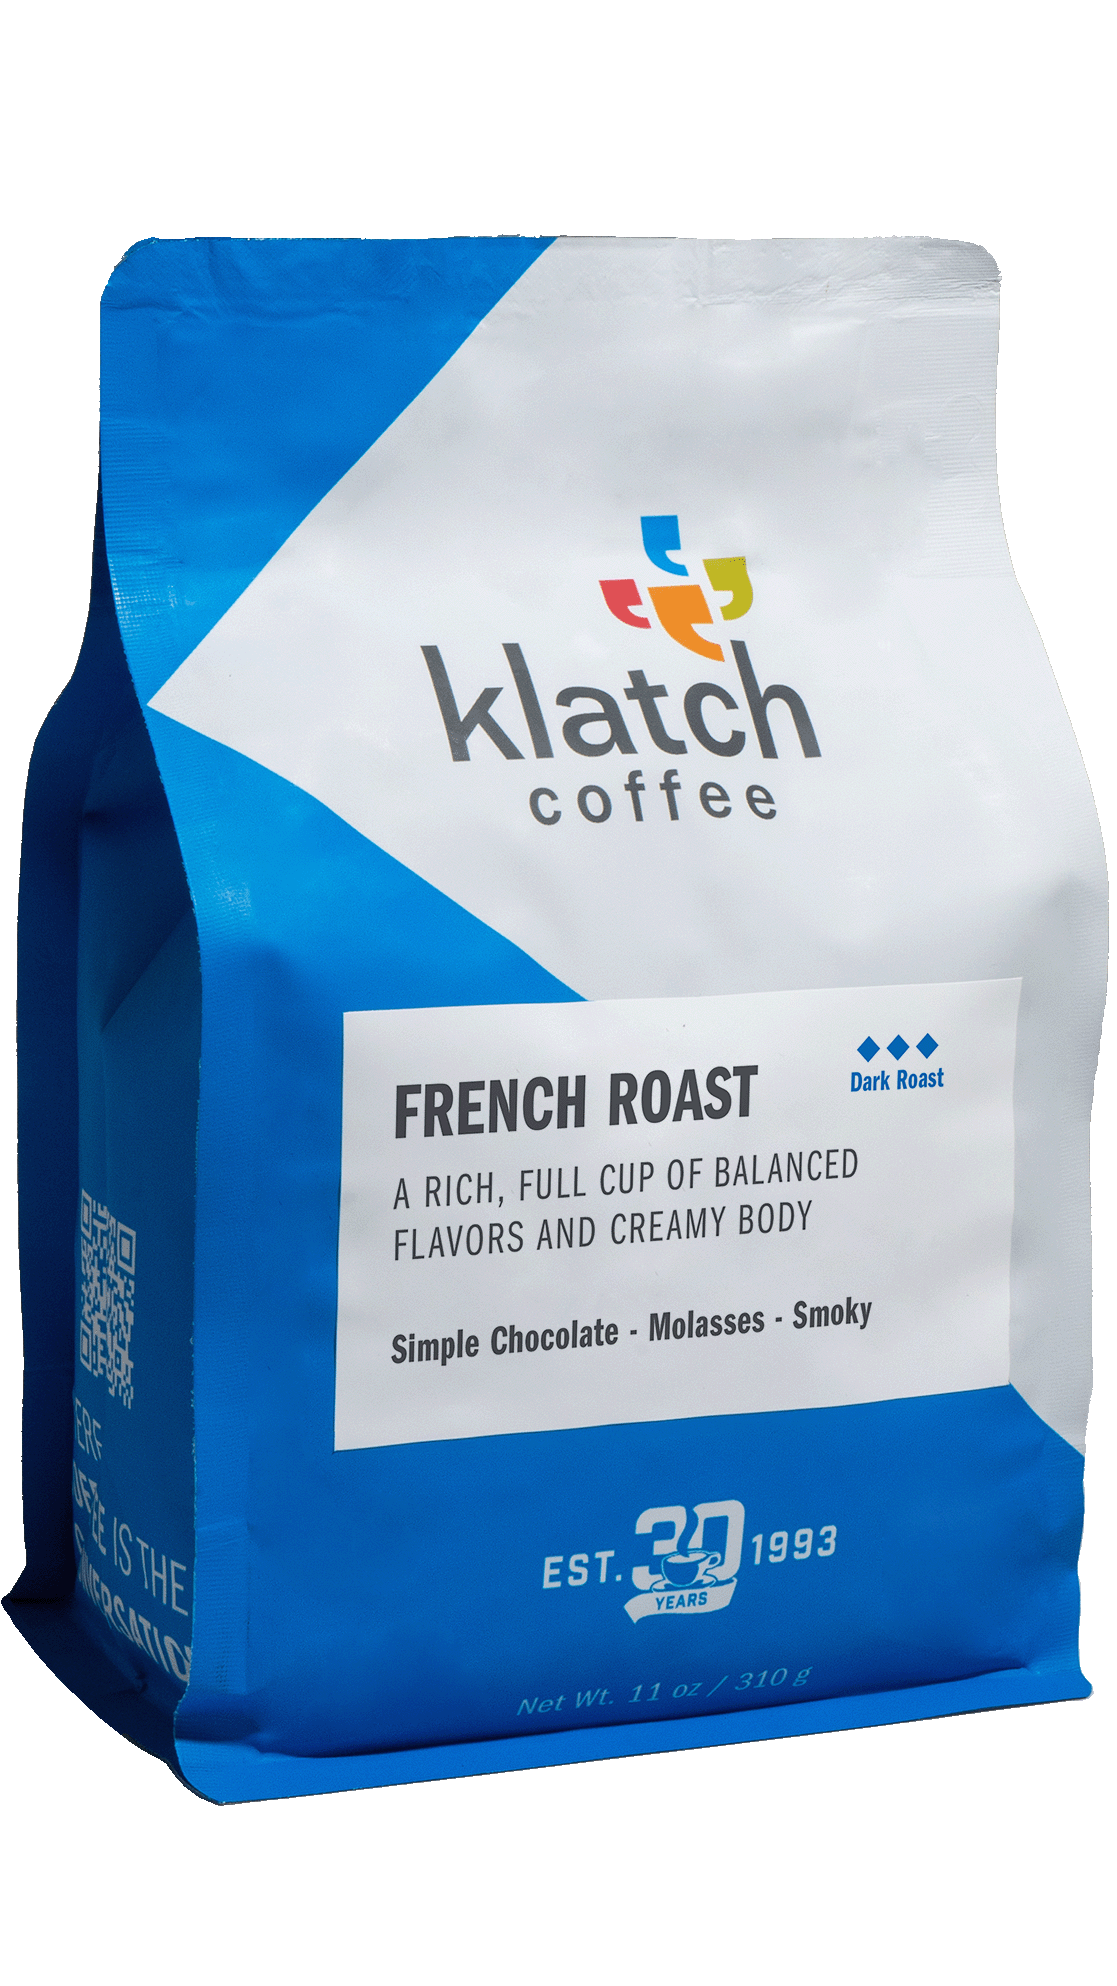 French Roast Starbucks Coffee Beans Review - Costco West Fan Blog